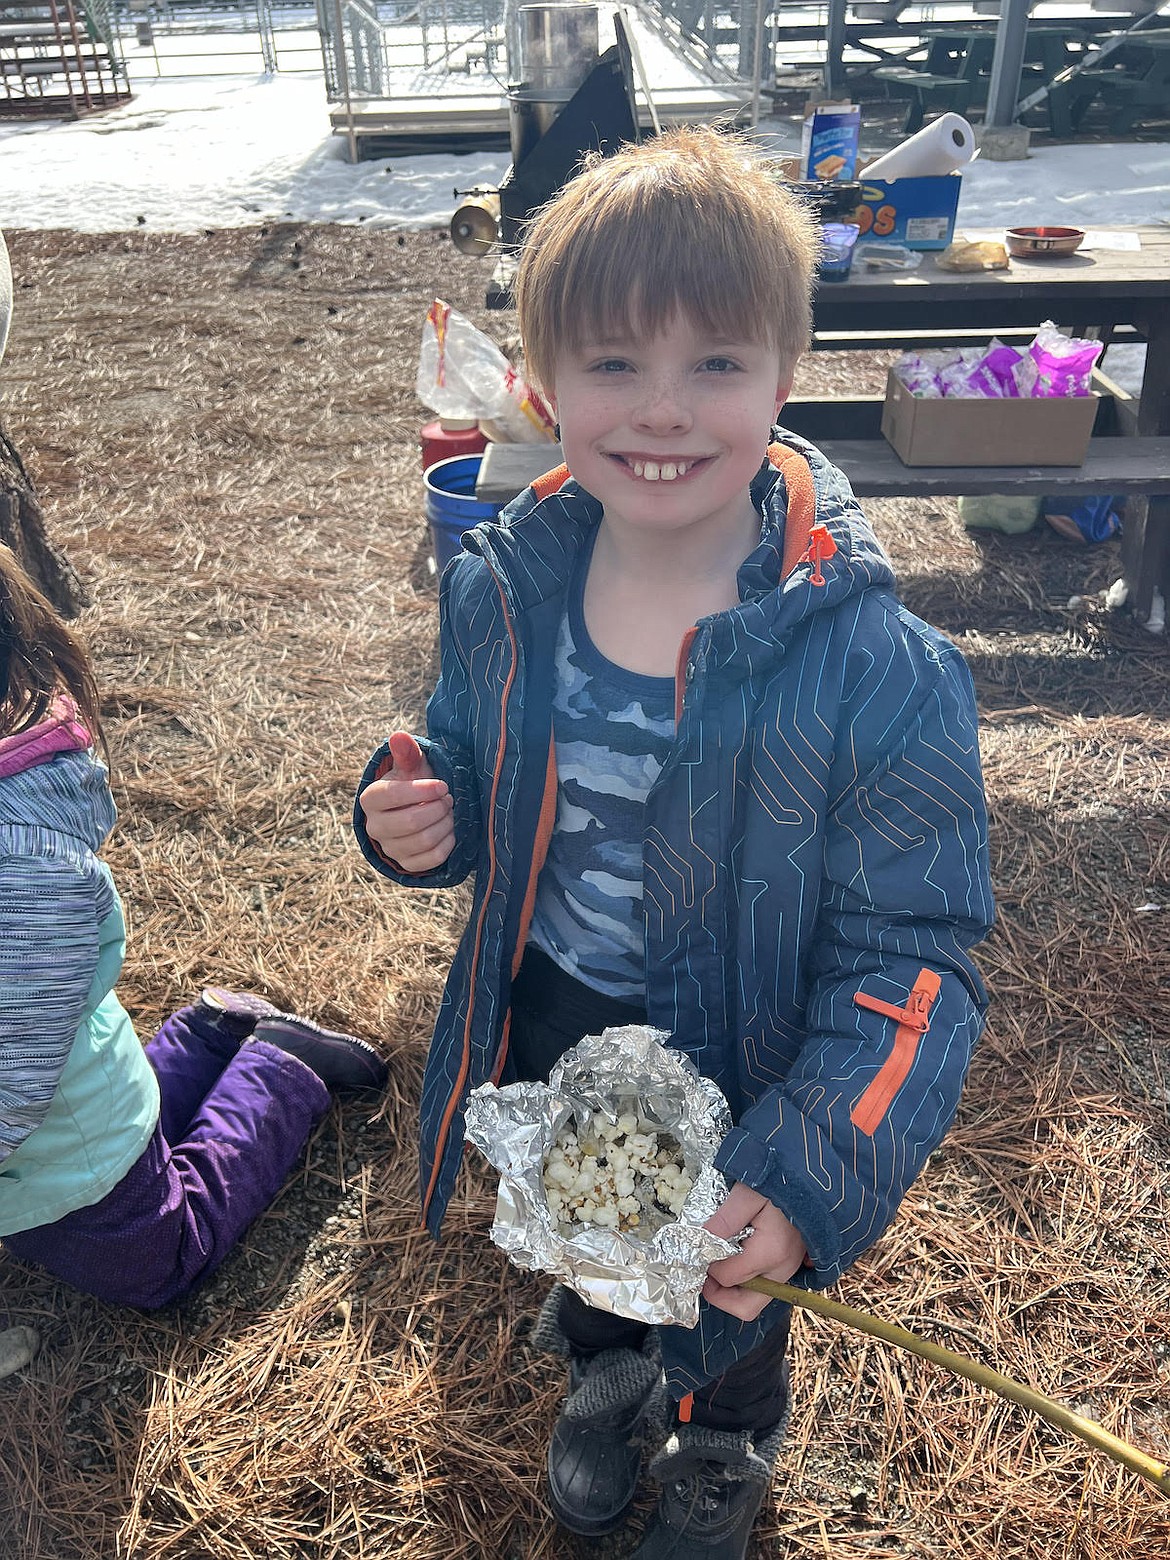 Libby Elementary School student Jaxon Smith shows off the popcorn he made over an open fire at the Winter Tracks event on Friday, Feb. 10. (Photo courtesy Jessica Thoeny)